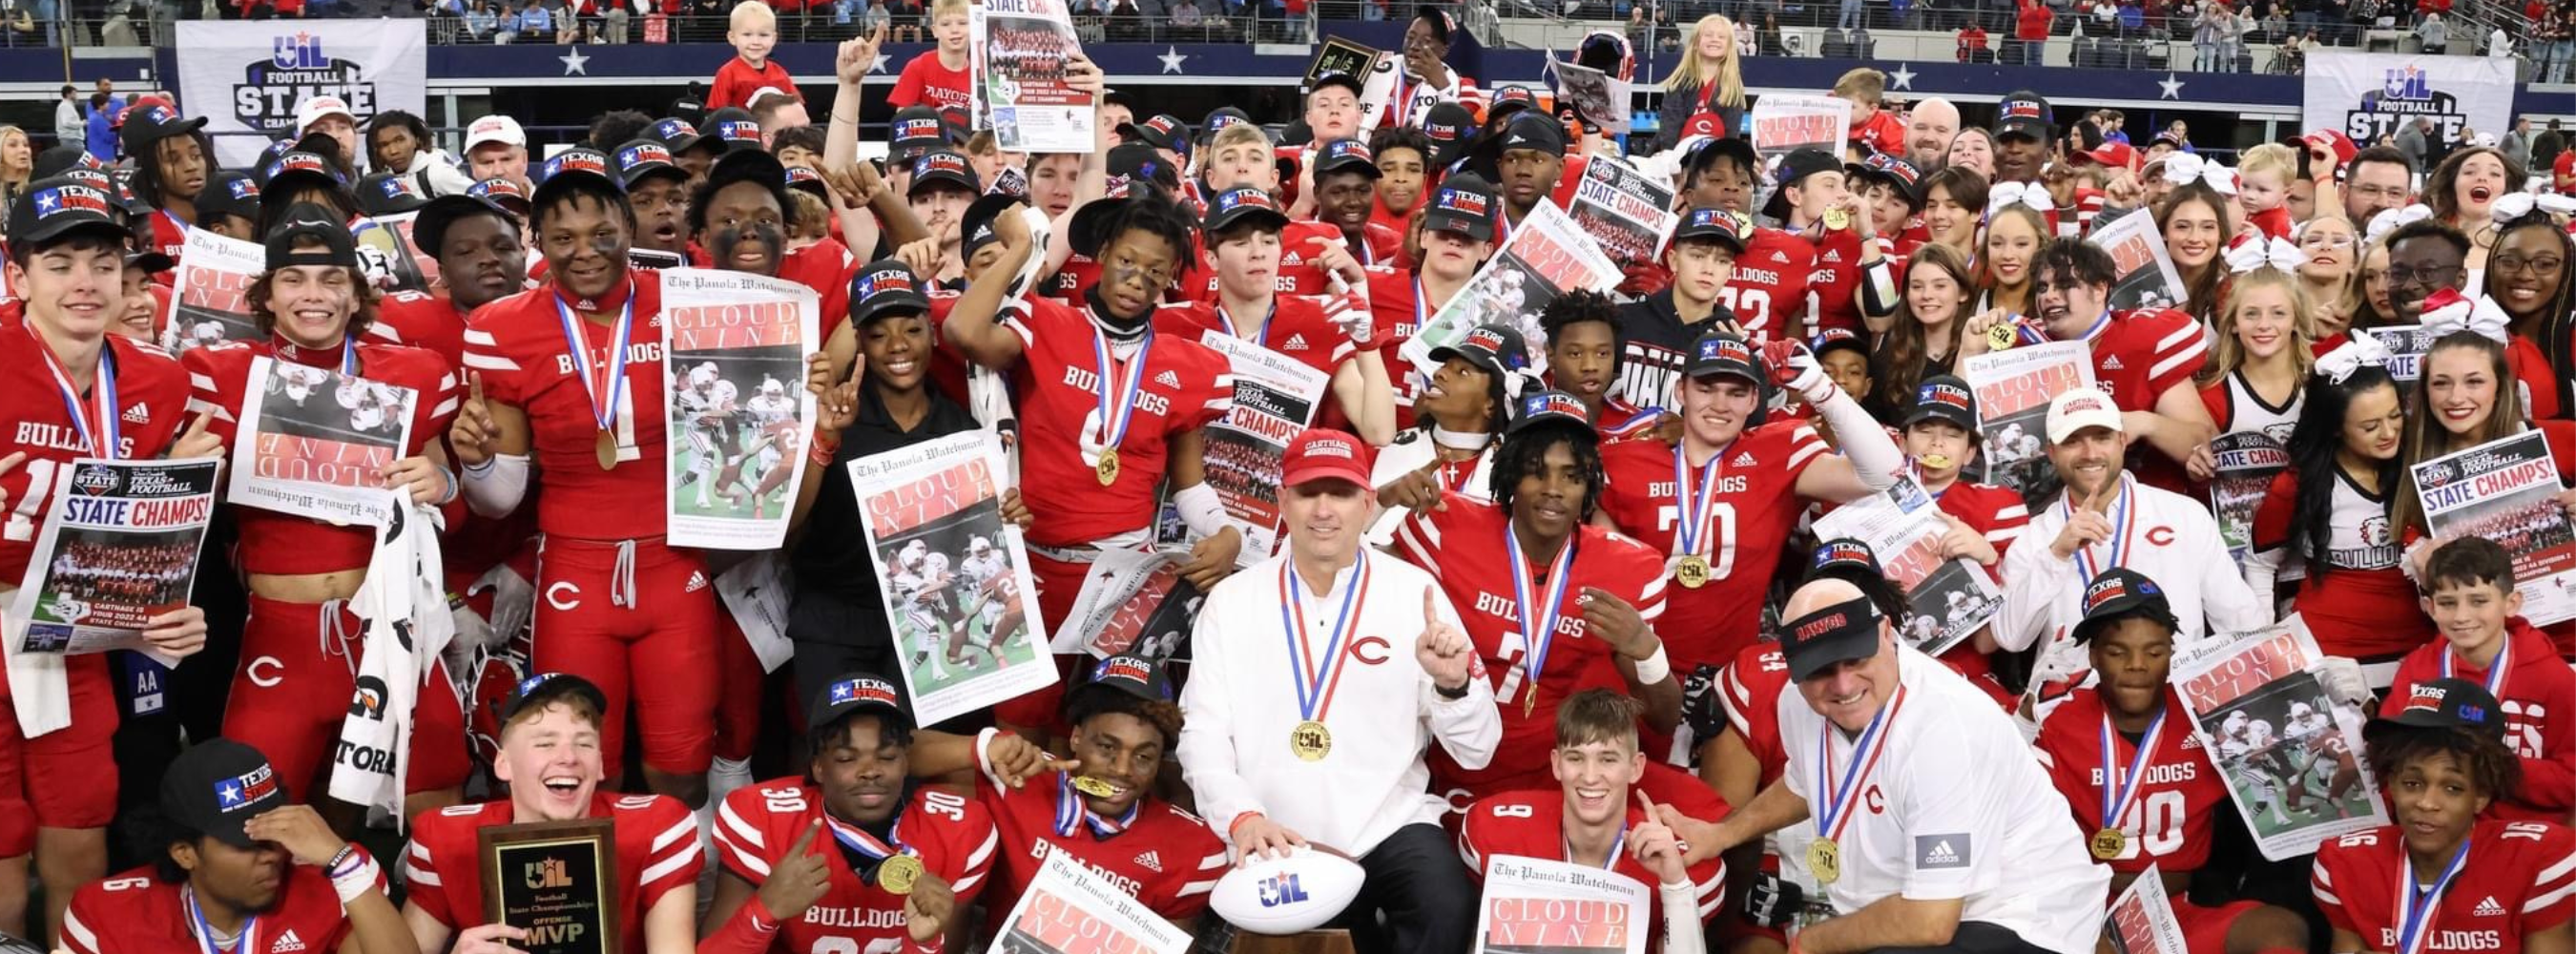 UIL 4A Division II Football State Champions